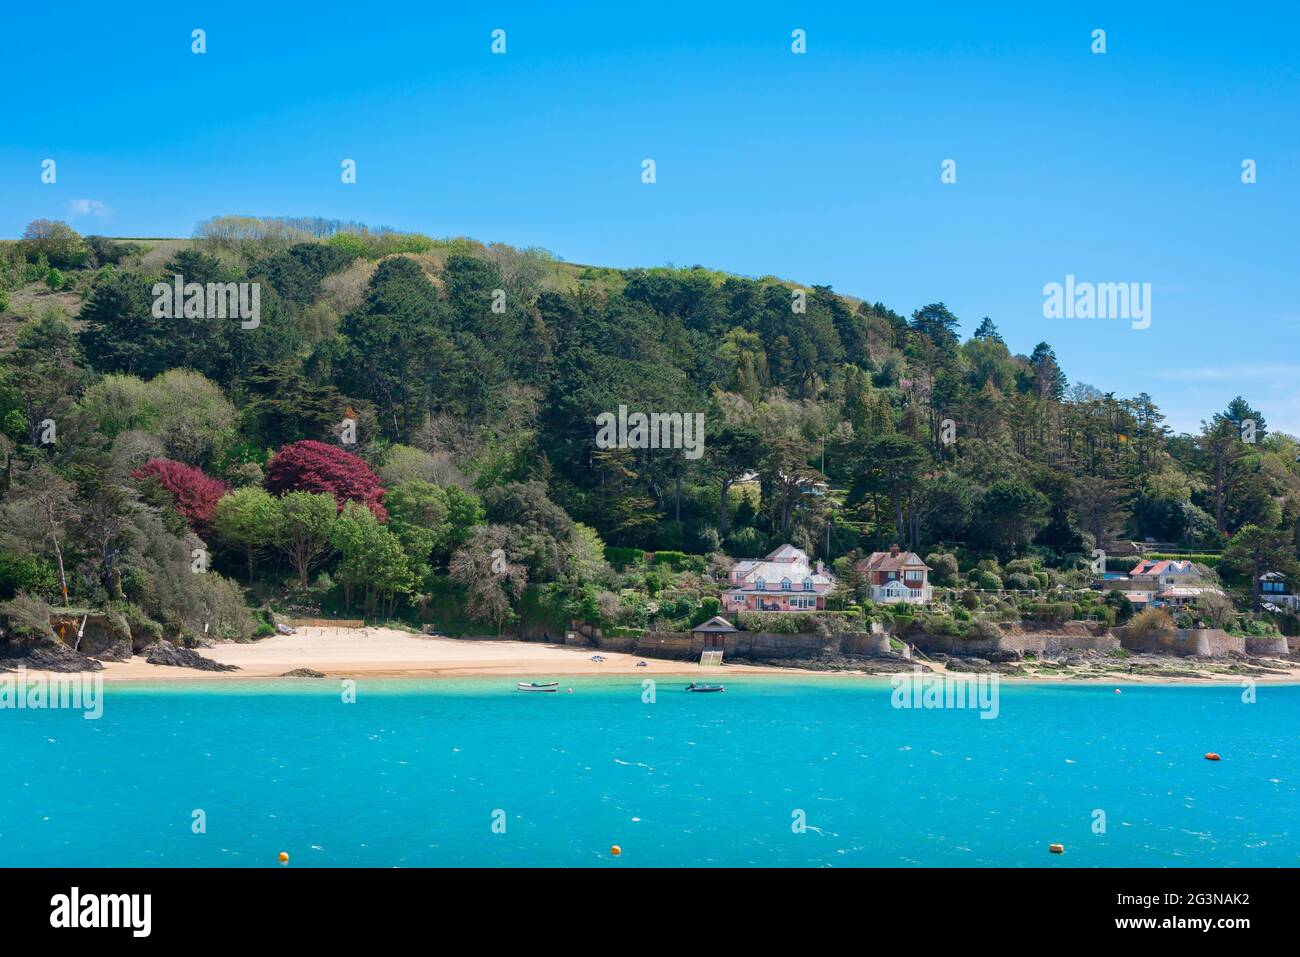 England coast, view in summer of the deserted beach at Small's Cove near East Portlemouth in the Salcombe Estuary, South Hams, Devon, England, UK Stock Photo